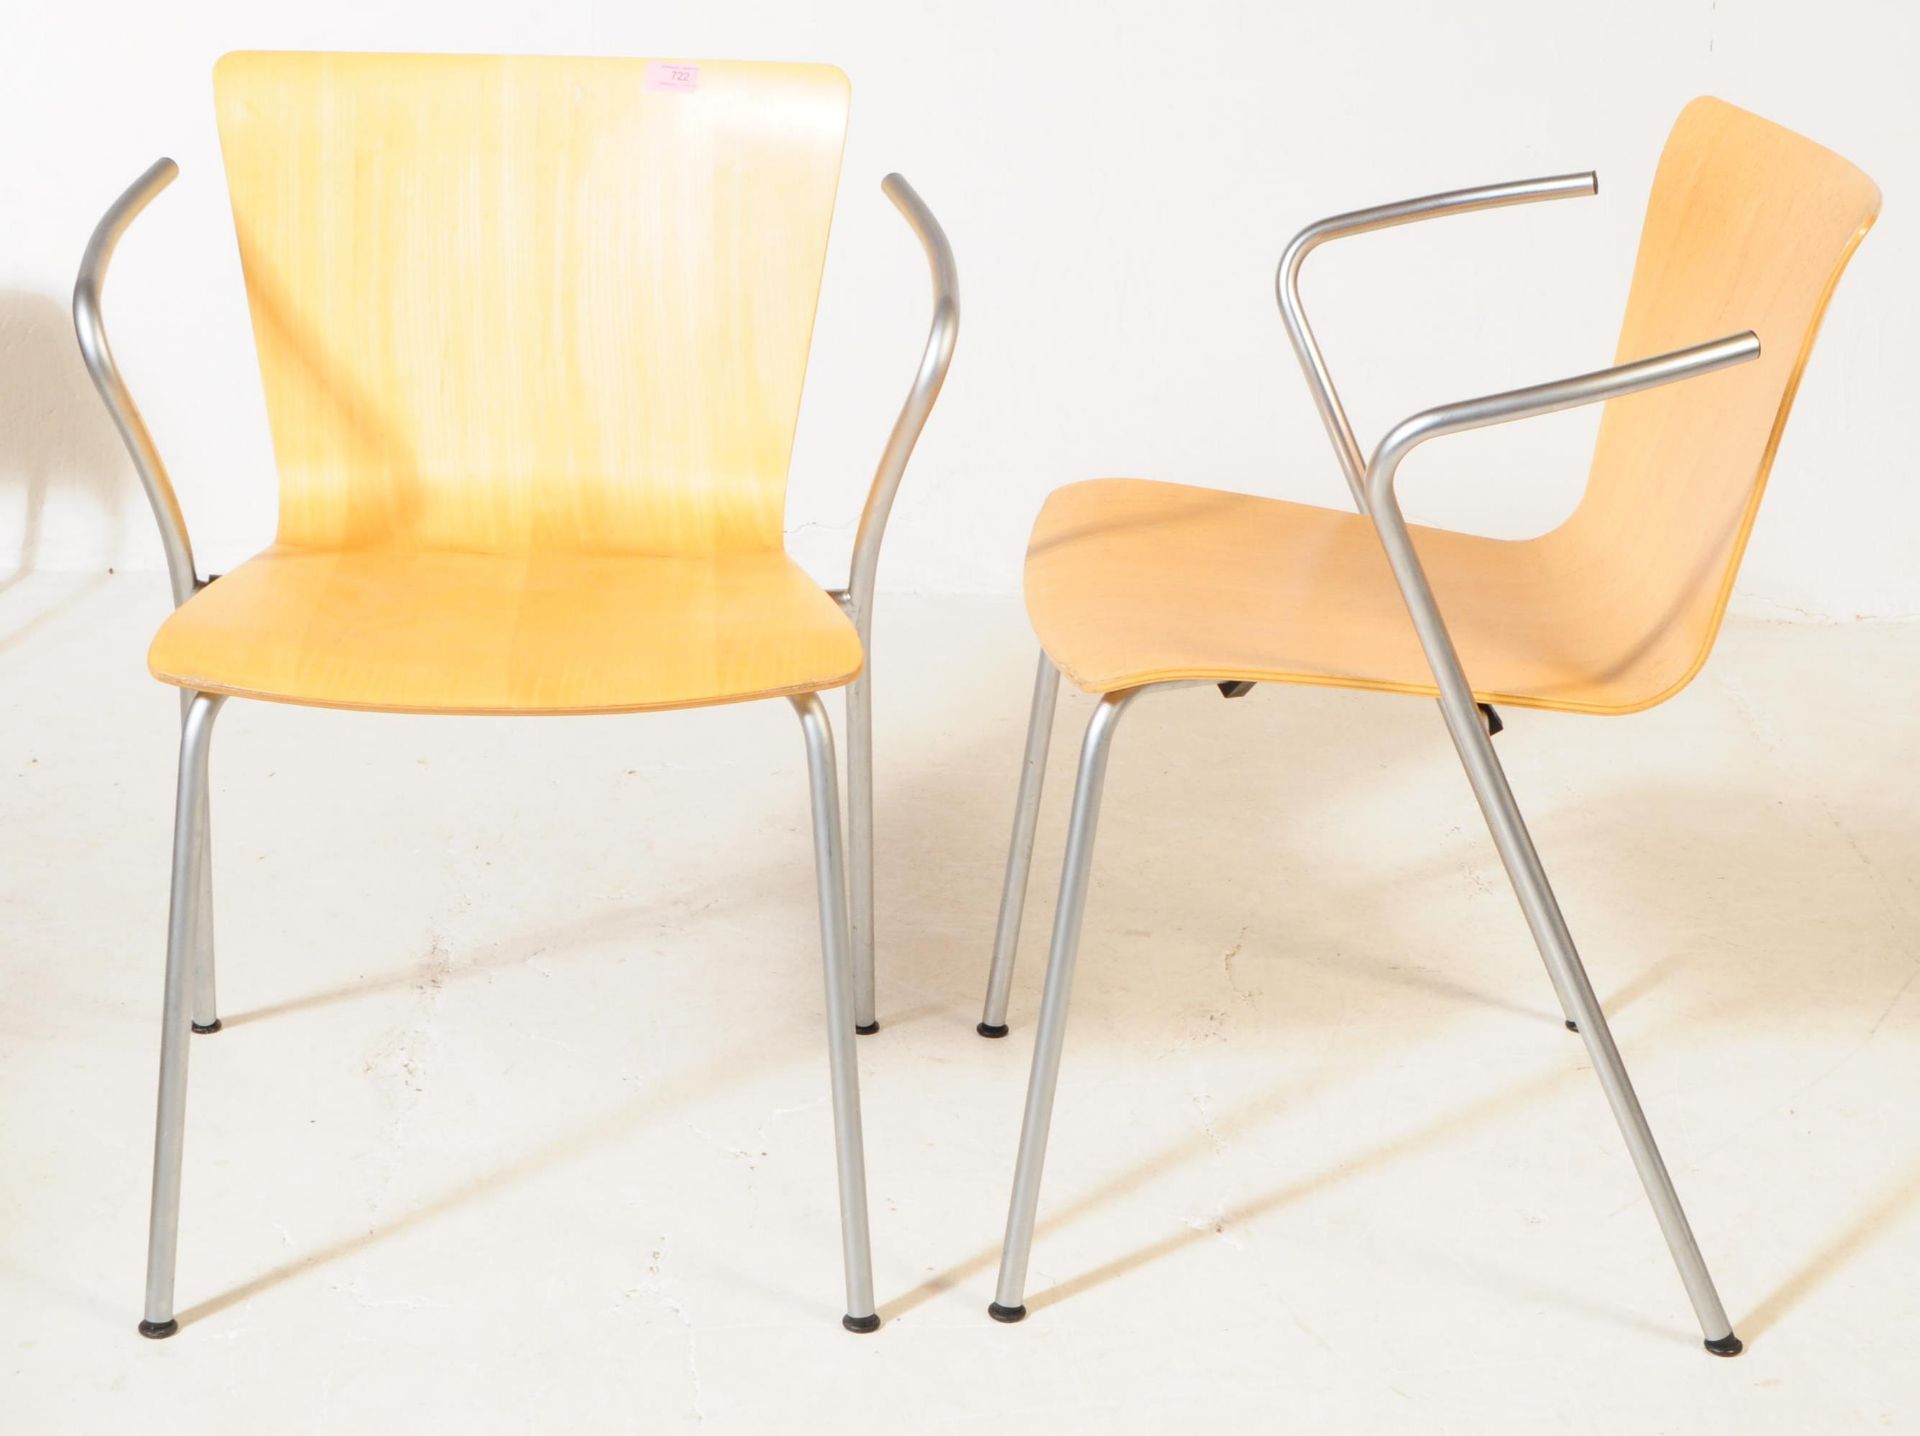 VICO MAGISTRETTI FOR FRITZ HANSEN - FOUR 20TH CENTURY DUO STACKING DINING CHAIRS - Image 2 of 4